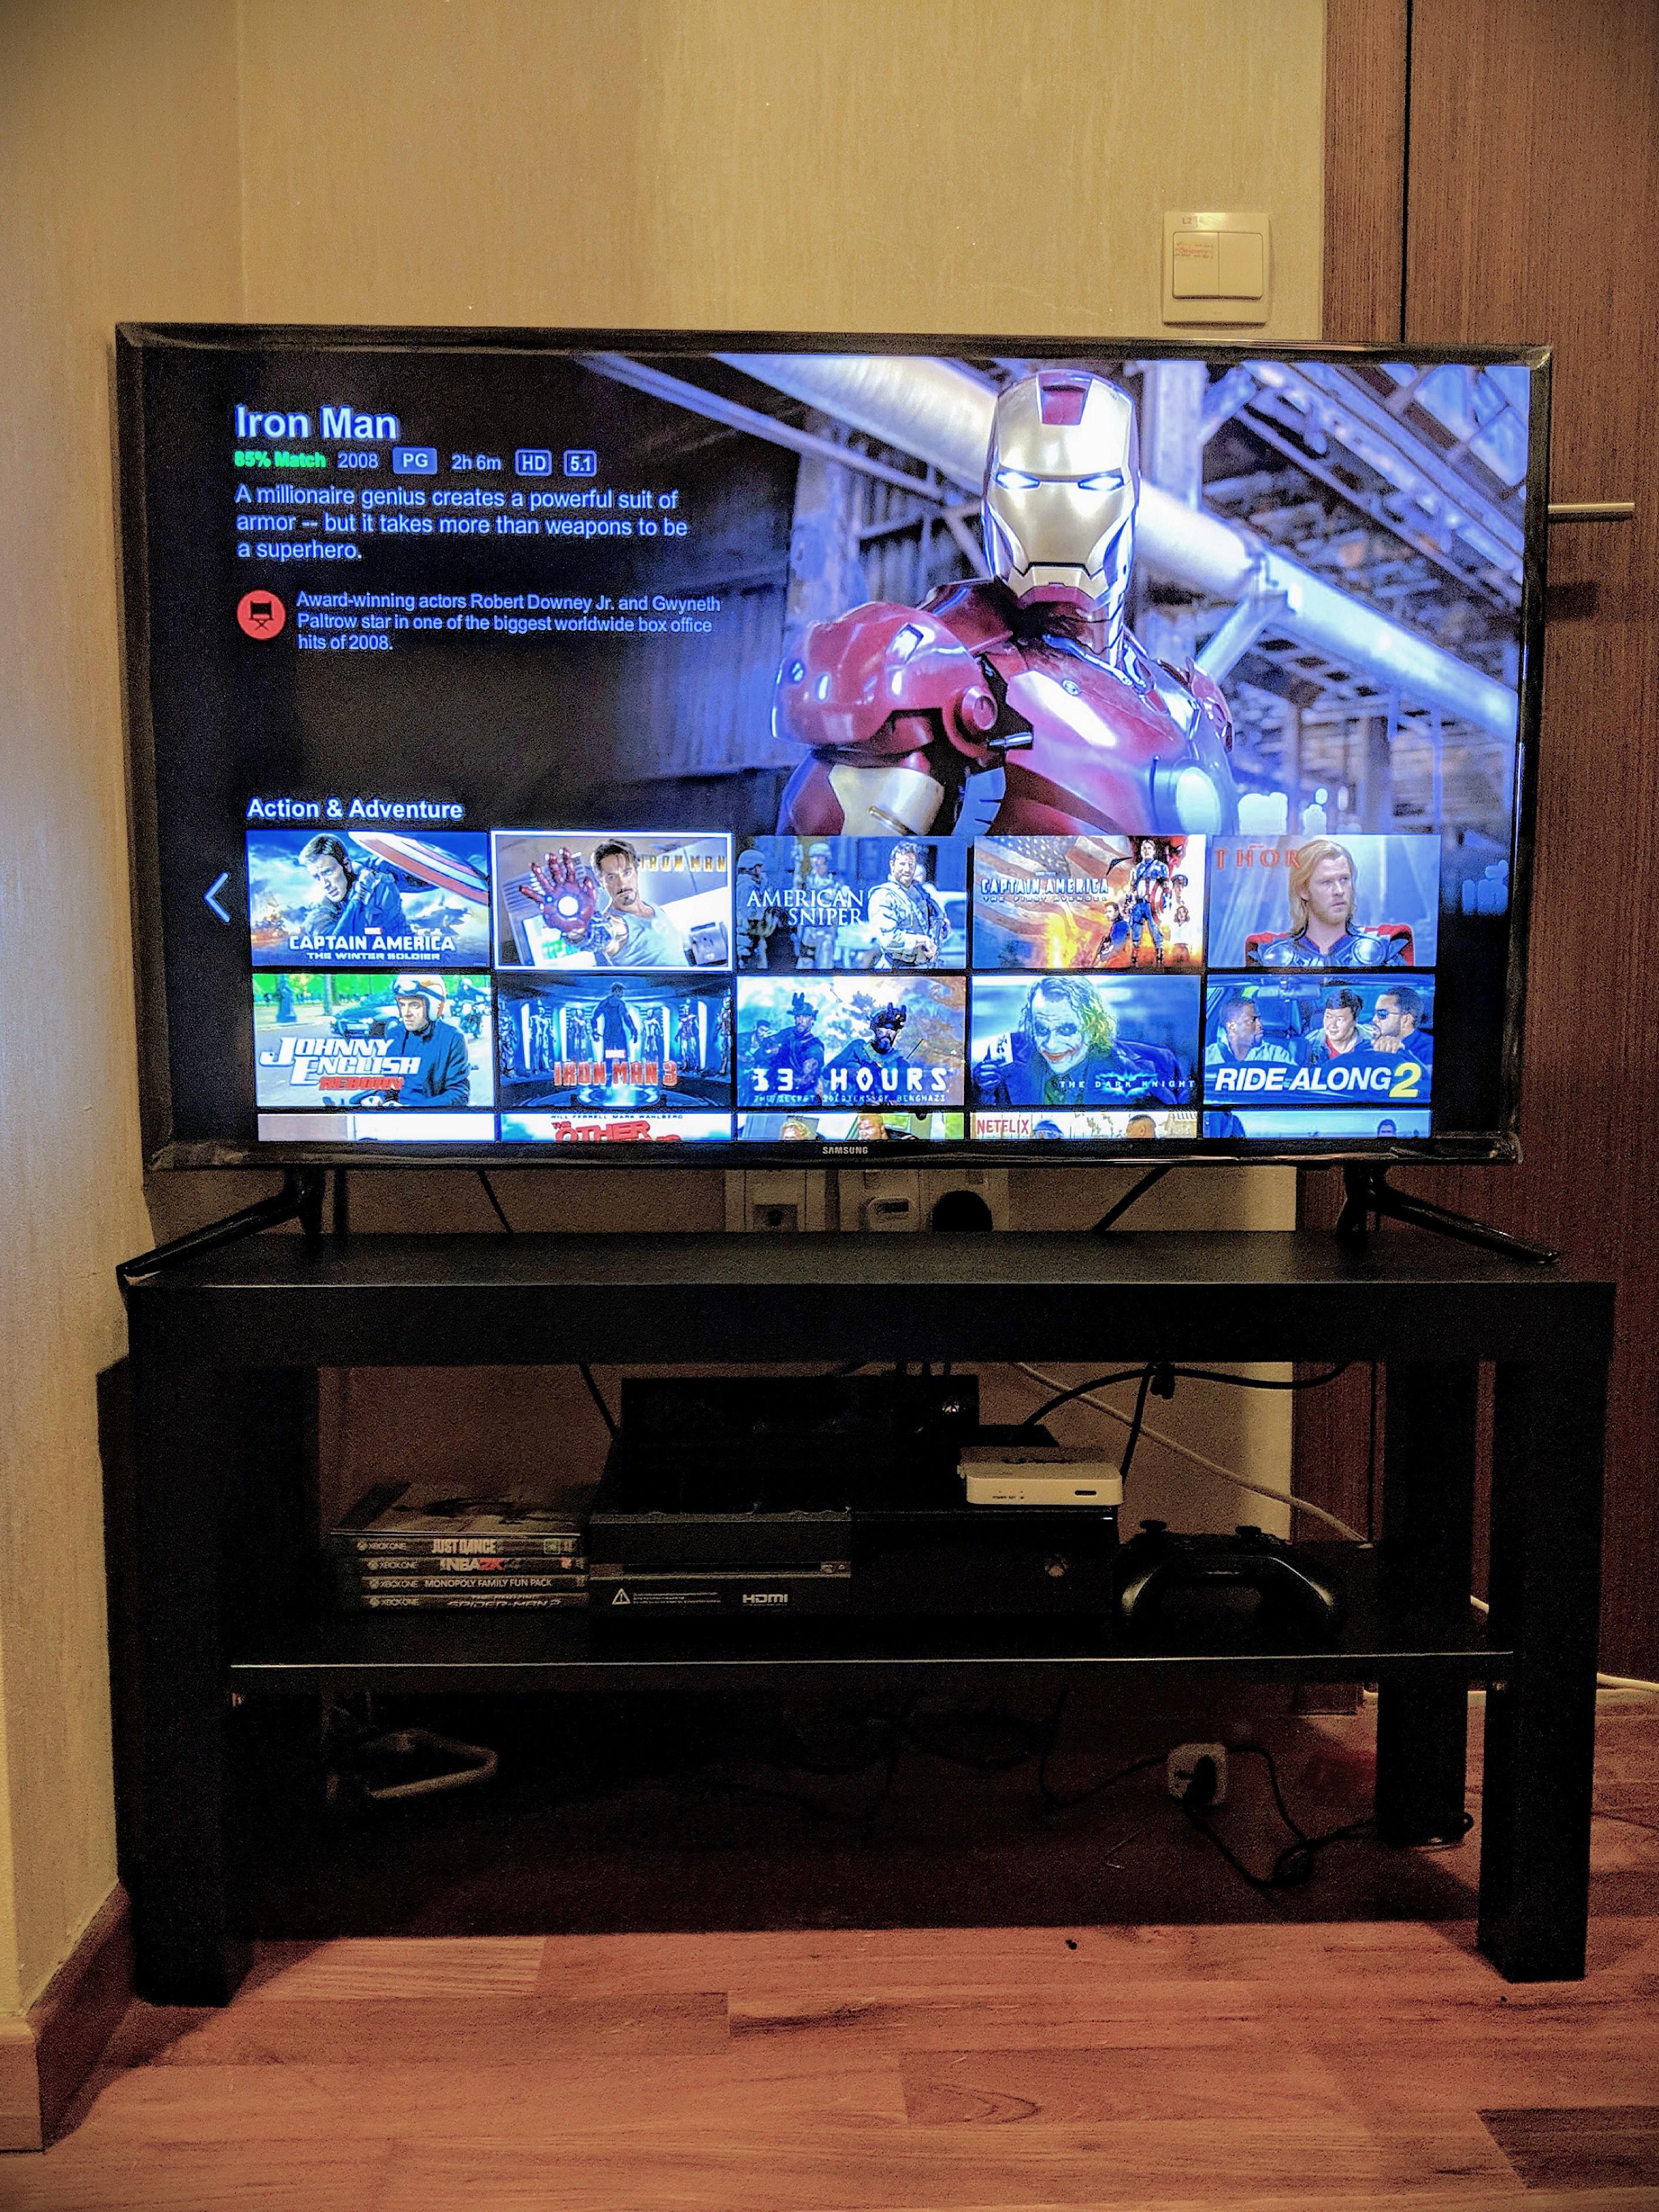 Haat Anemoon vis Spanje Samsung 40" LED UHD Smart TV with FREE TV console from Ikea (Used), TV &  Home Appliances, TV & Entertainment, TV on Carousell